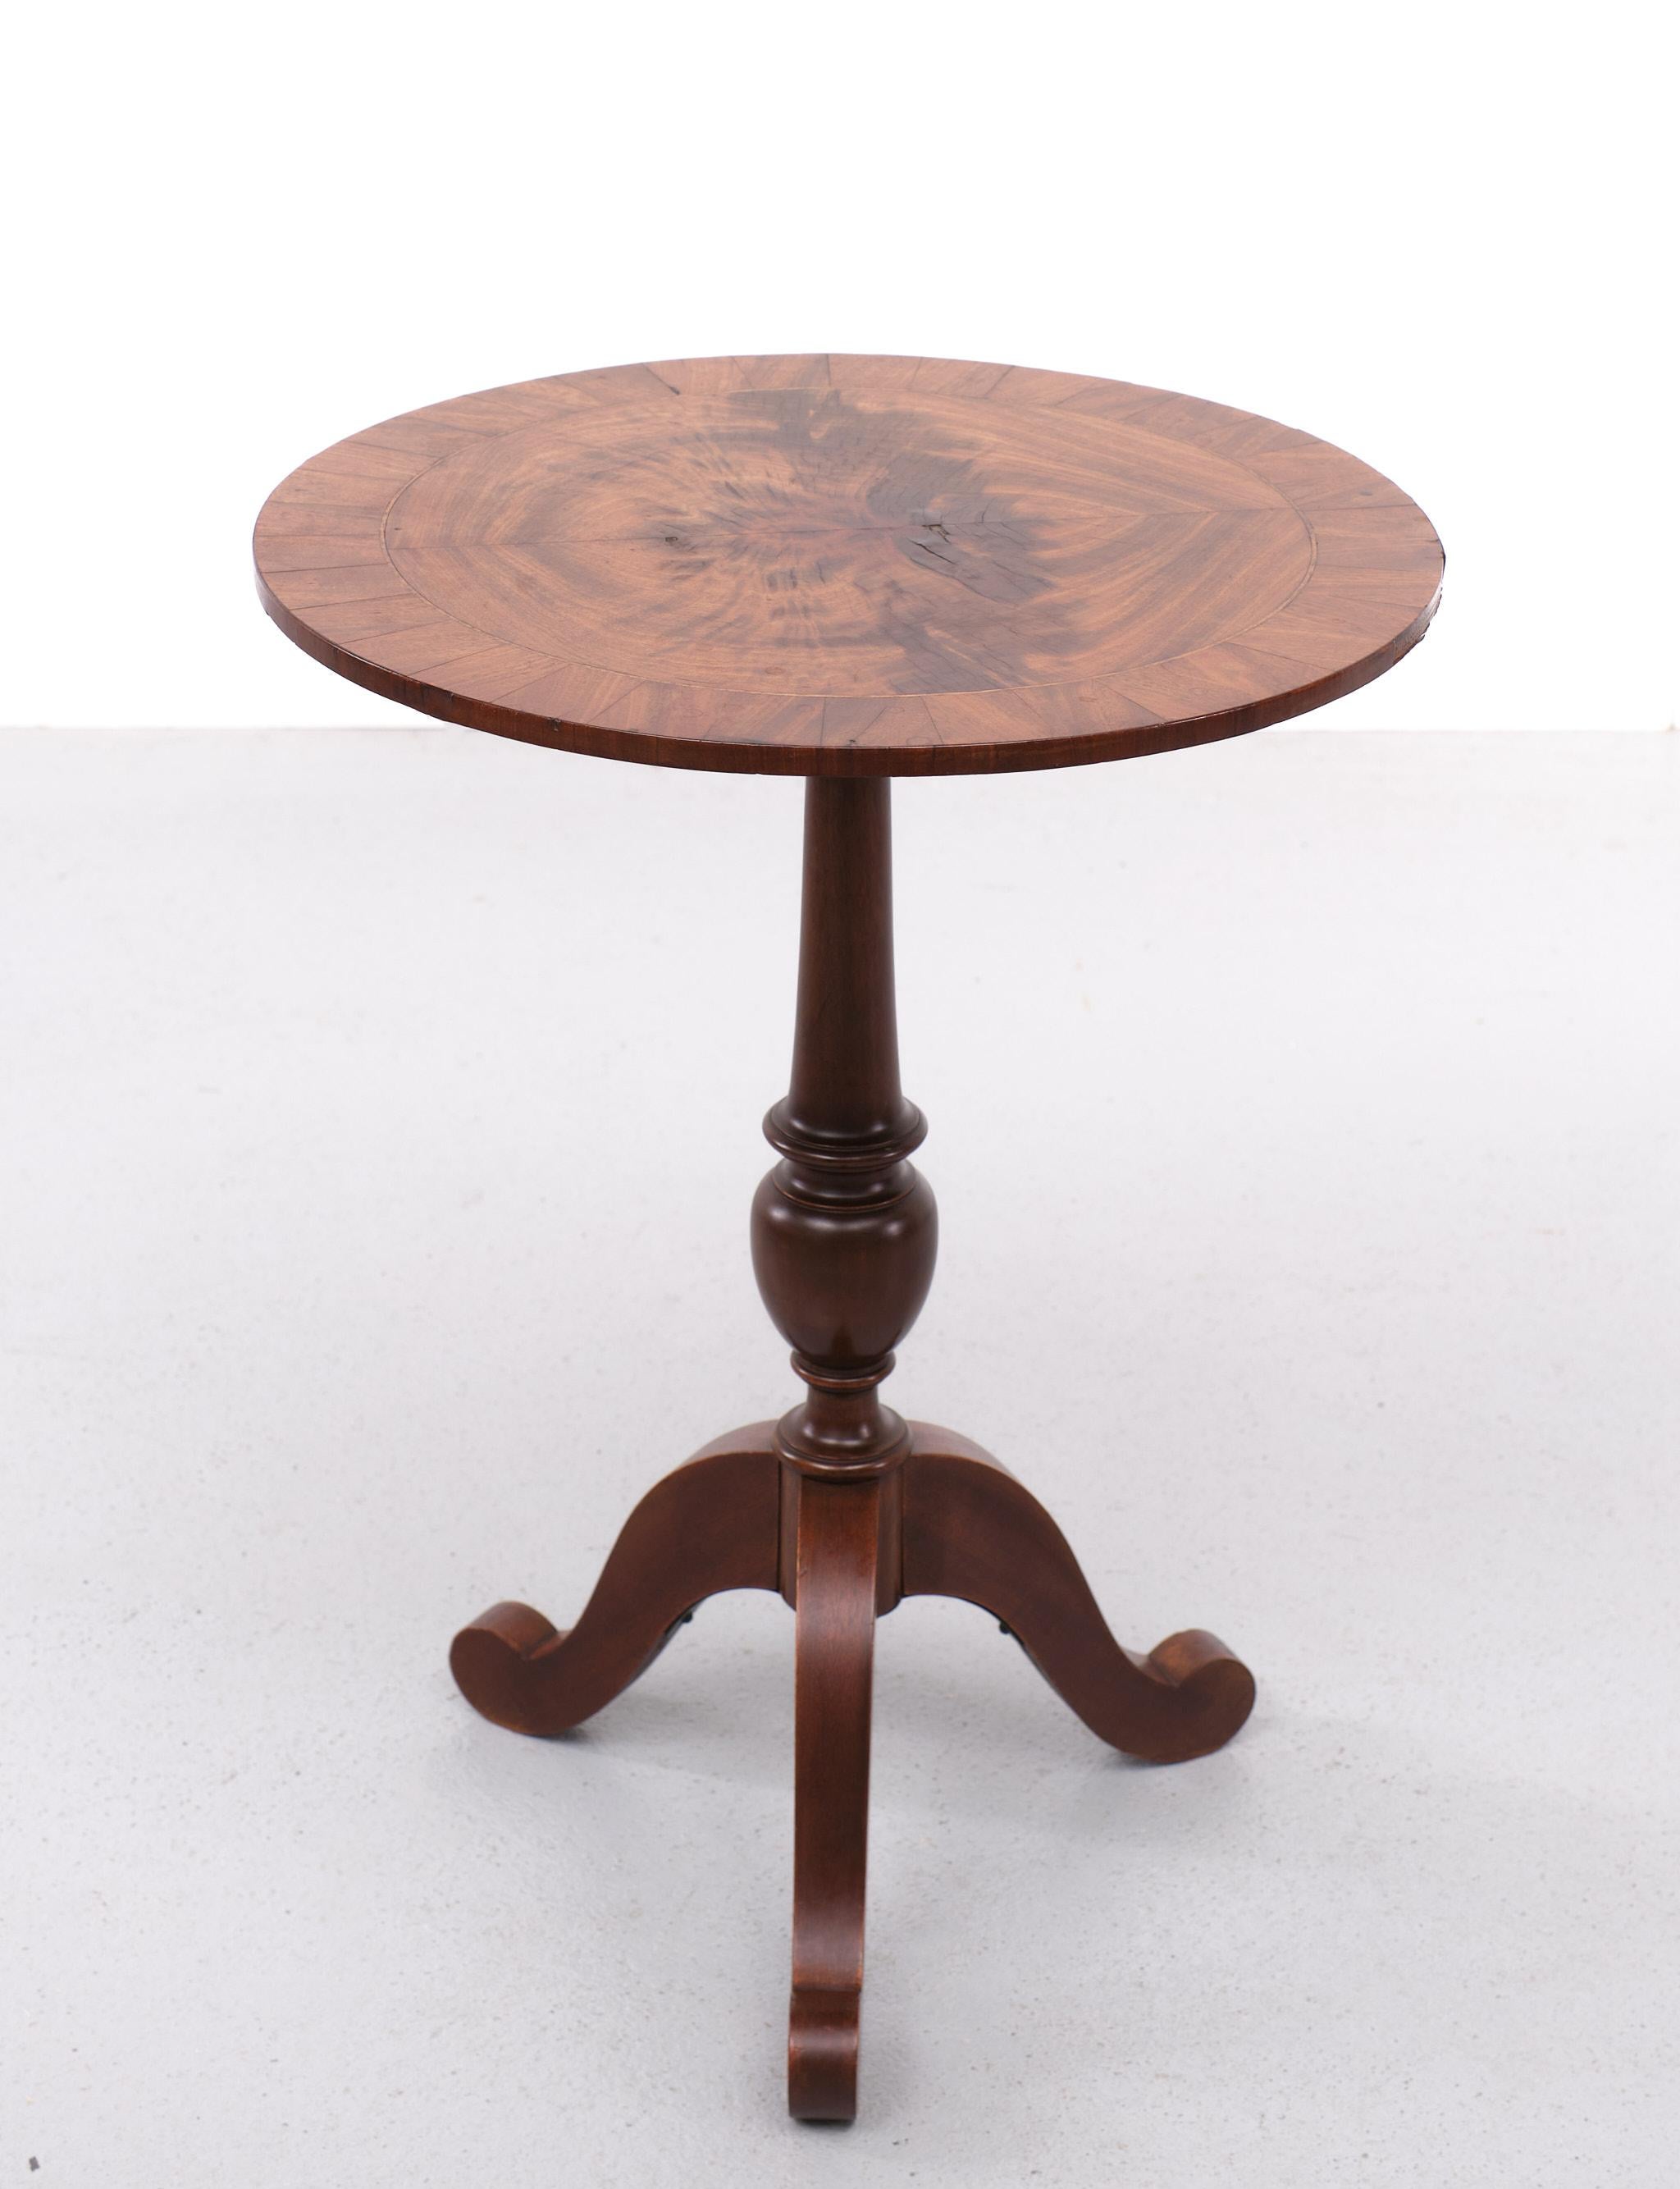 Antique Burl Wood Carafe Table 1880s England  In Good Condition For Sale In Den Haag, NL